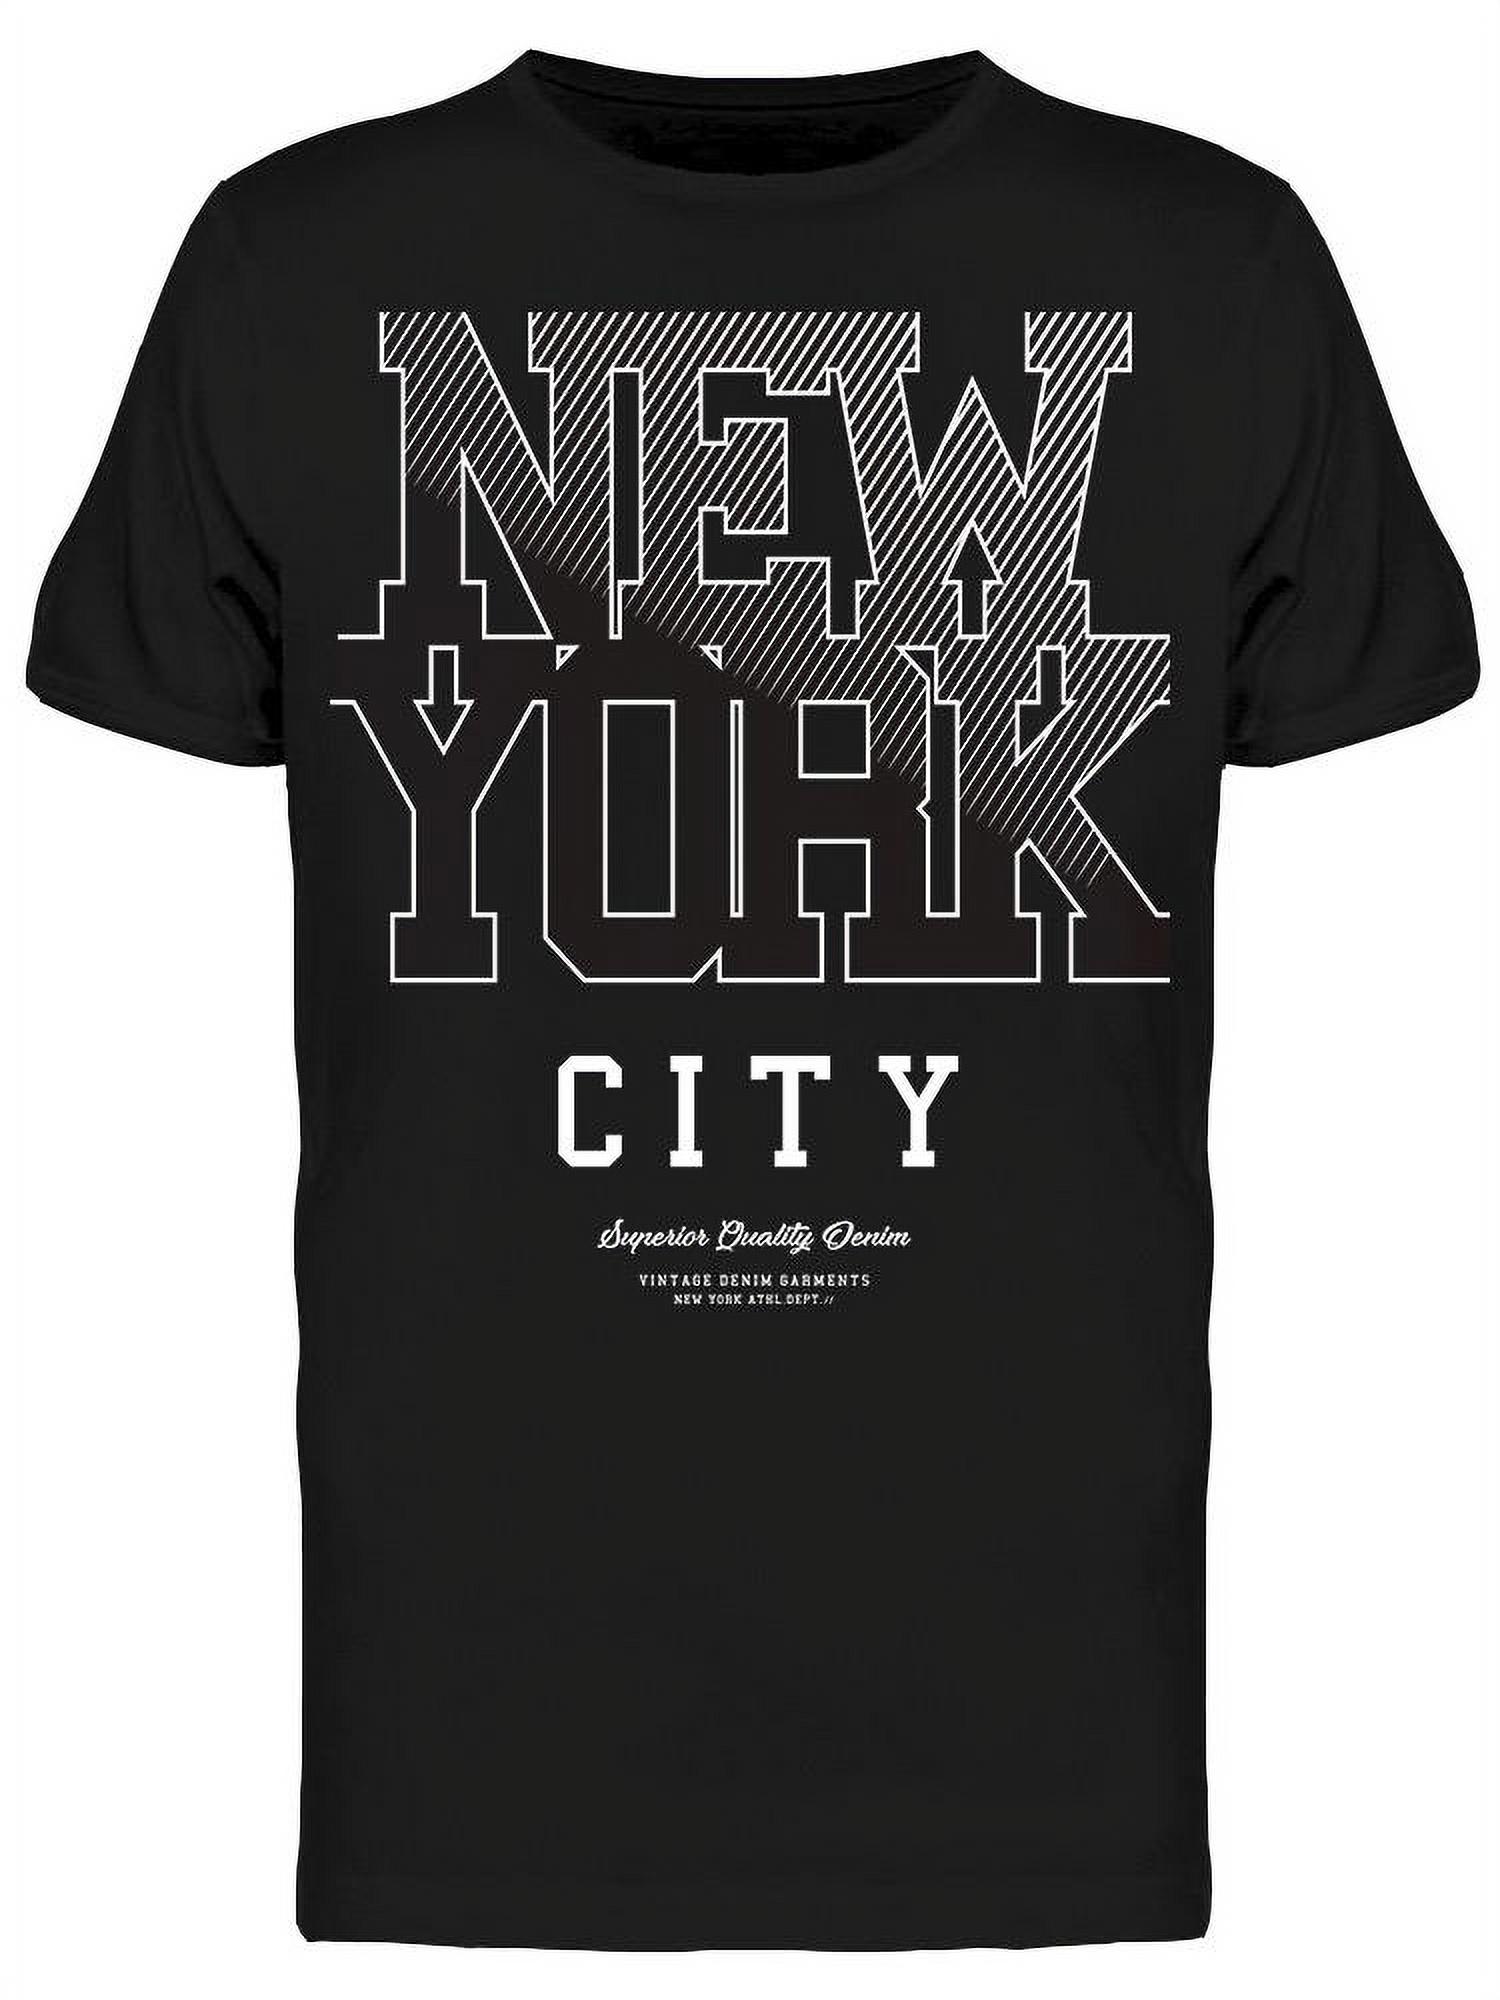 City Lettering  T-Shirt Men -Image by Shutterstock, Male 3X-Large - image 1 of 2